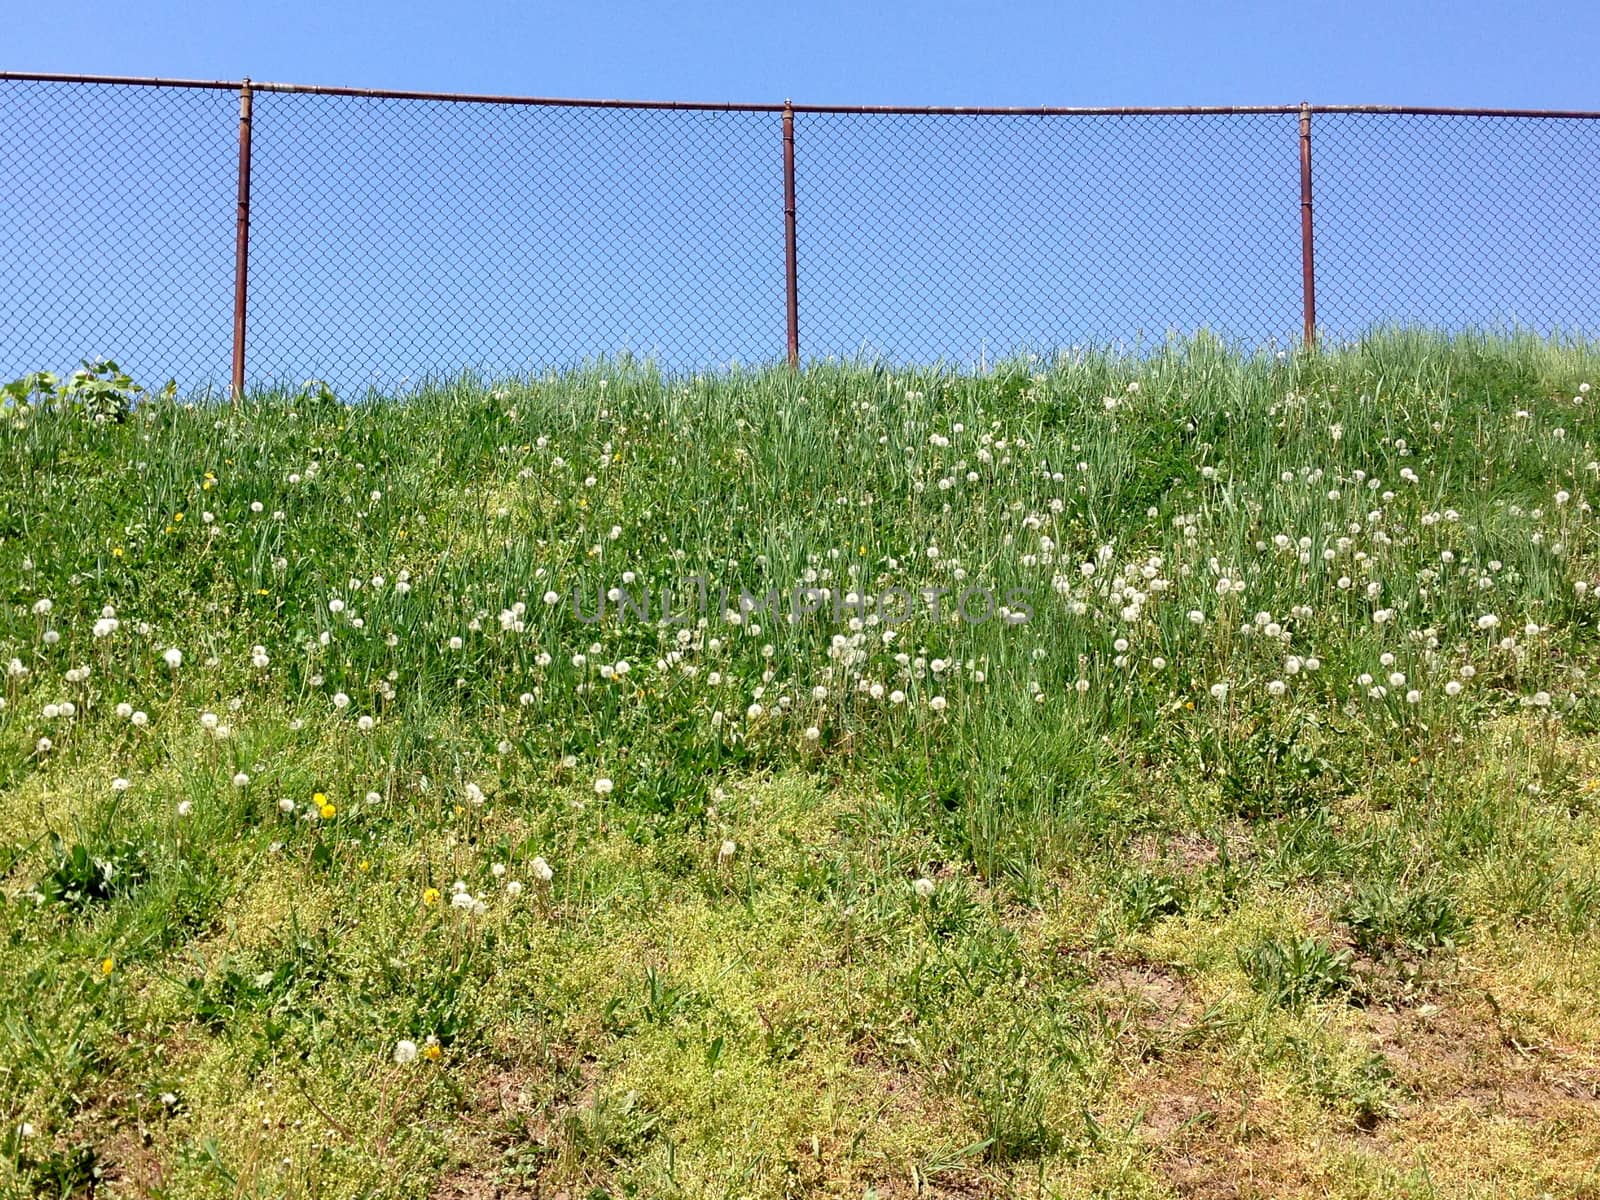 Fence, hill, and weeds against a clear blue sky.